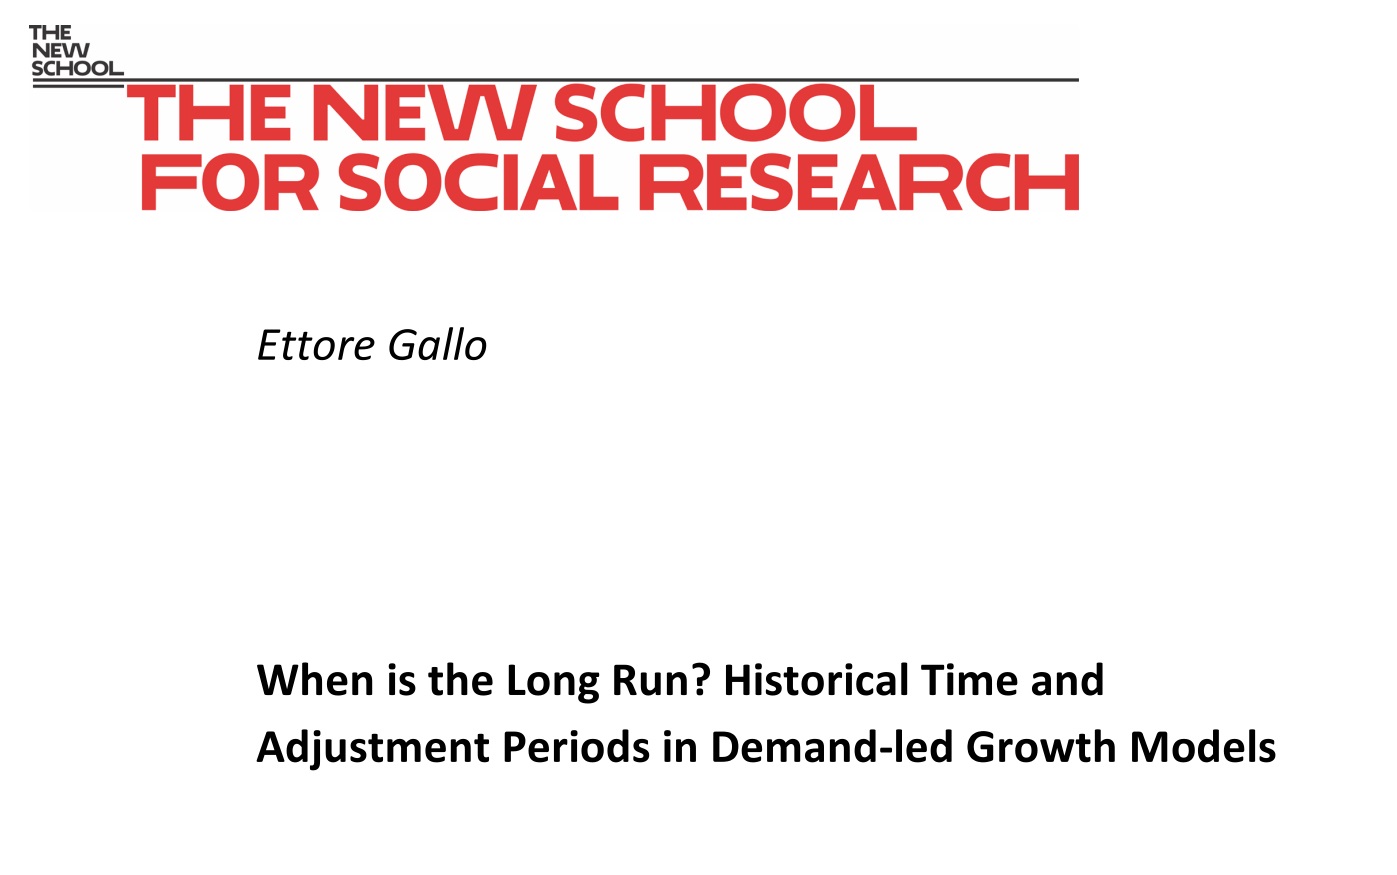 Working Paper - When is the Long Run? Historical Time and Adjustment Periods in Demand-led Growth Models